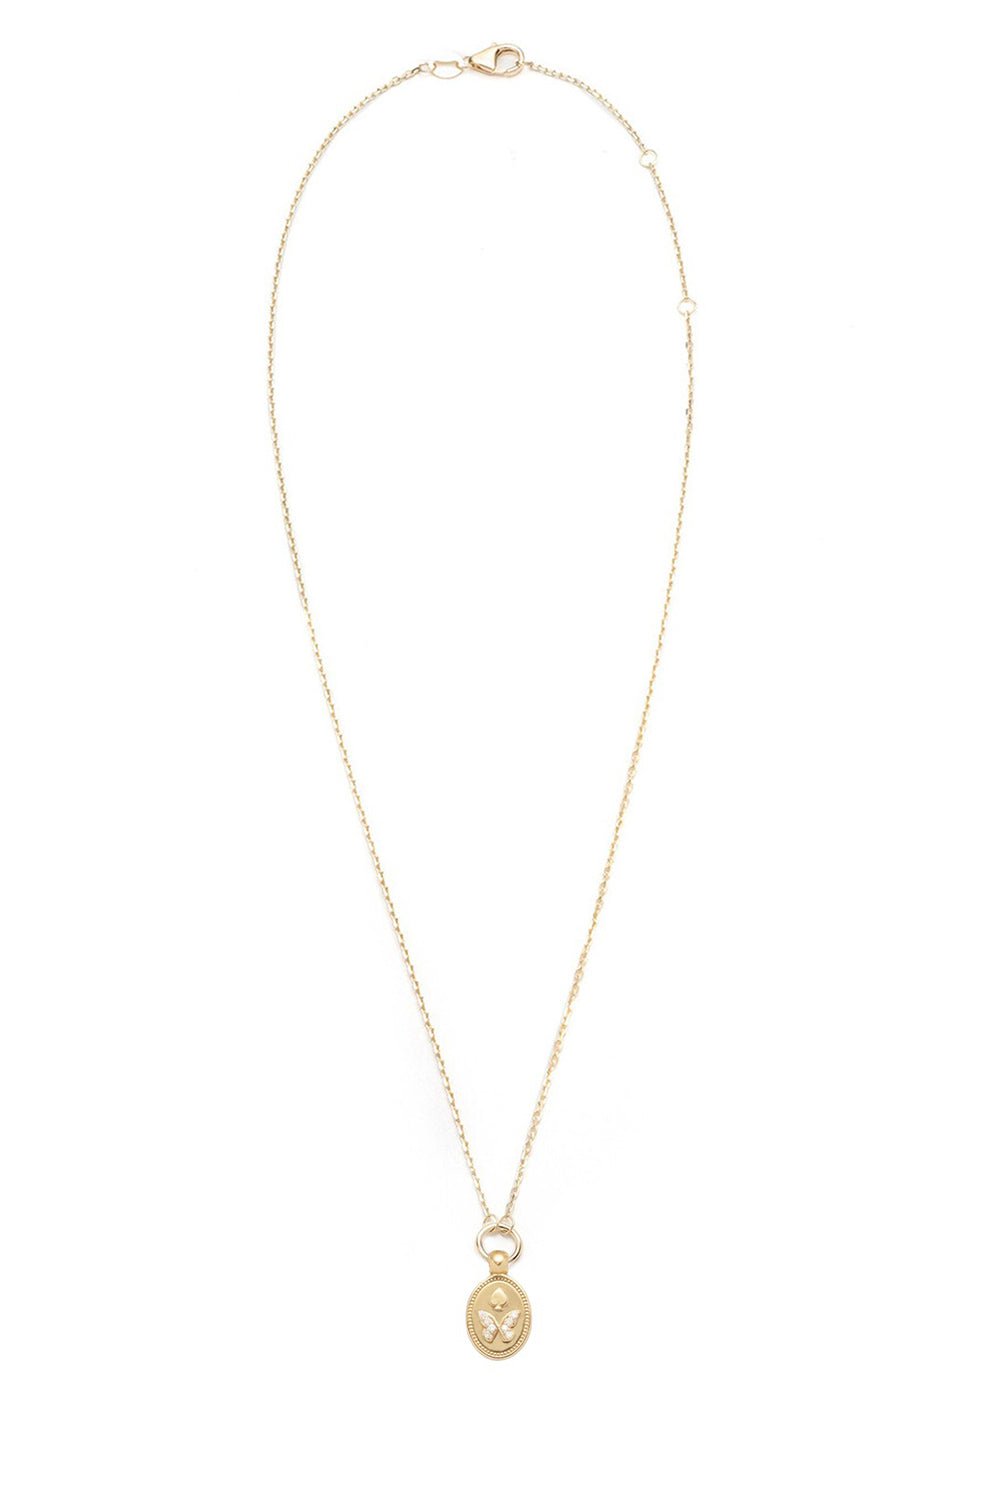 FOUNDRAE-Reverie Miniature Crest Drop Necklace-YELLOW GOLD